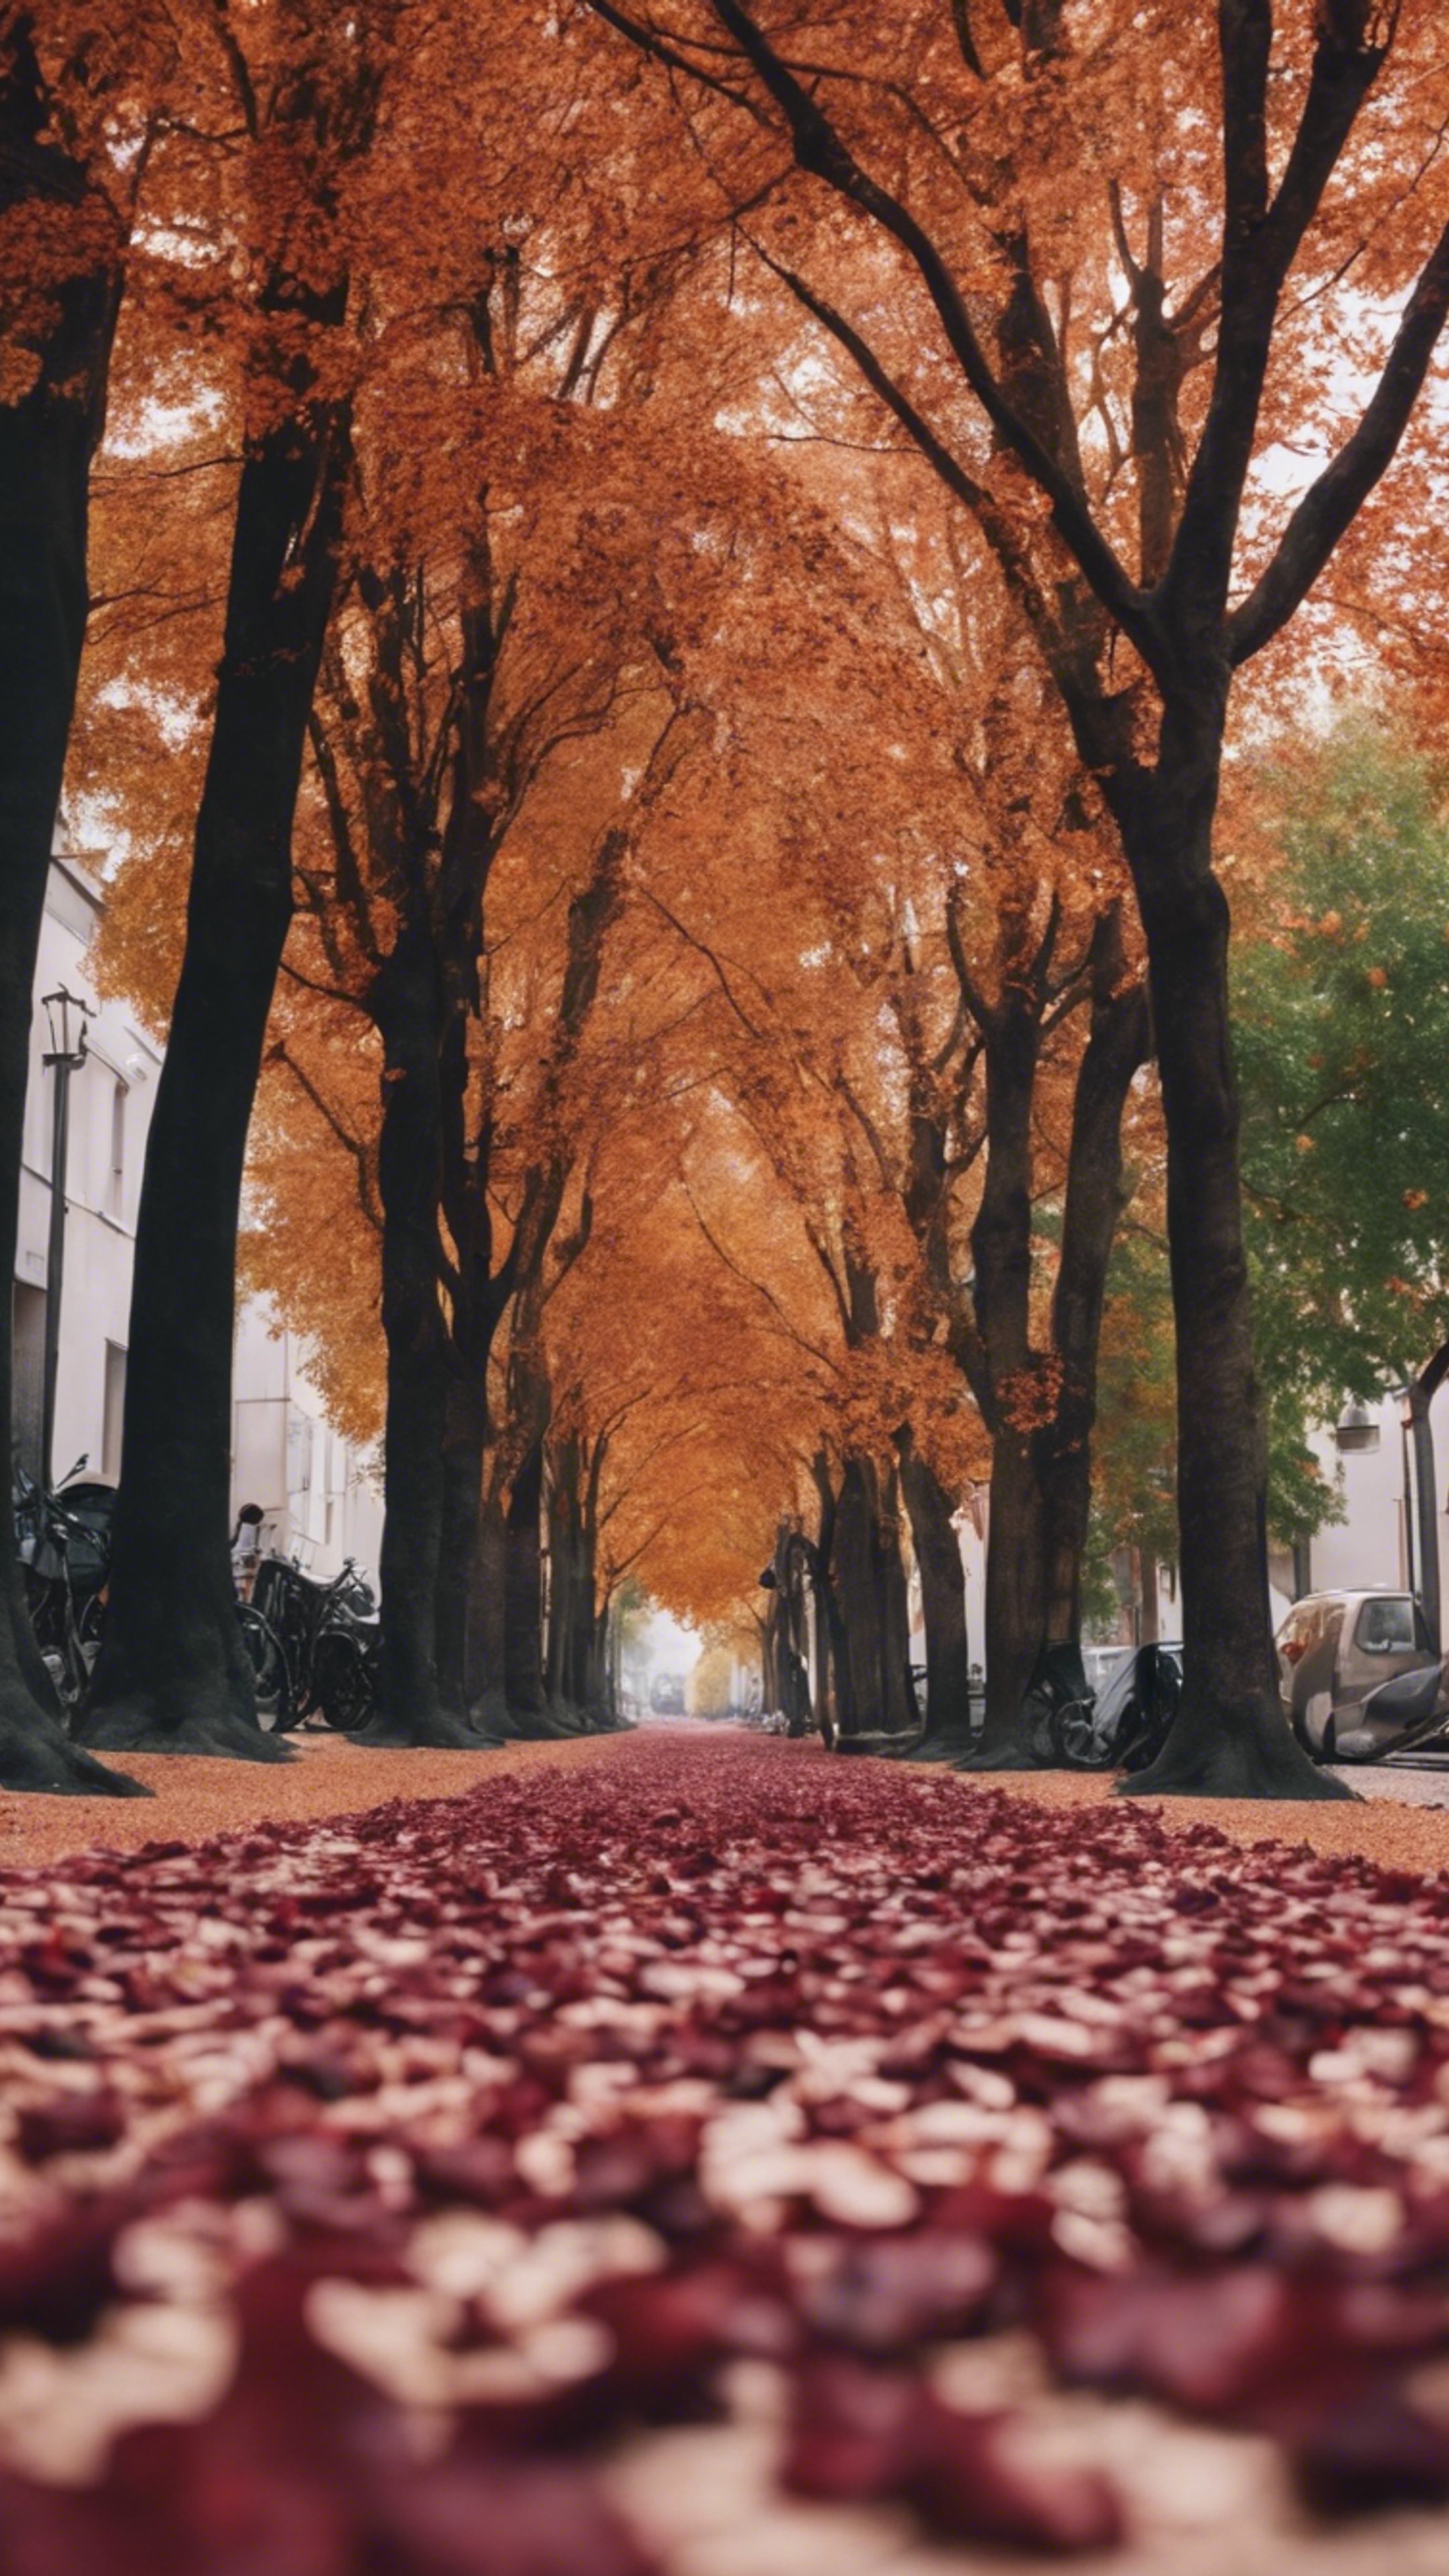 A street in autumn with burgundy leaves falling from the trees creating a beautiful comfortable carpet. ផ្ទាំង​រូបភាព[db339216d700423d88d1]